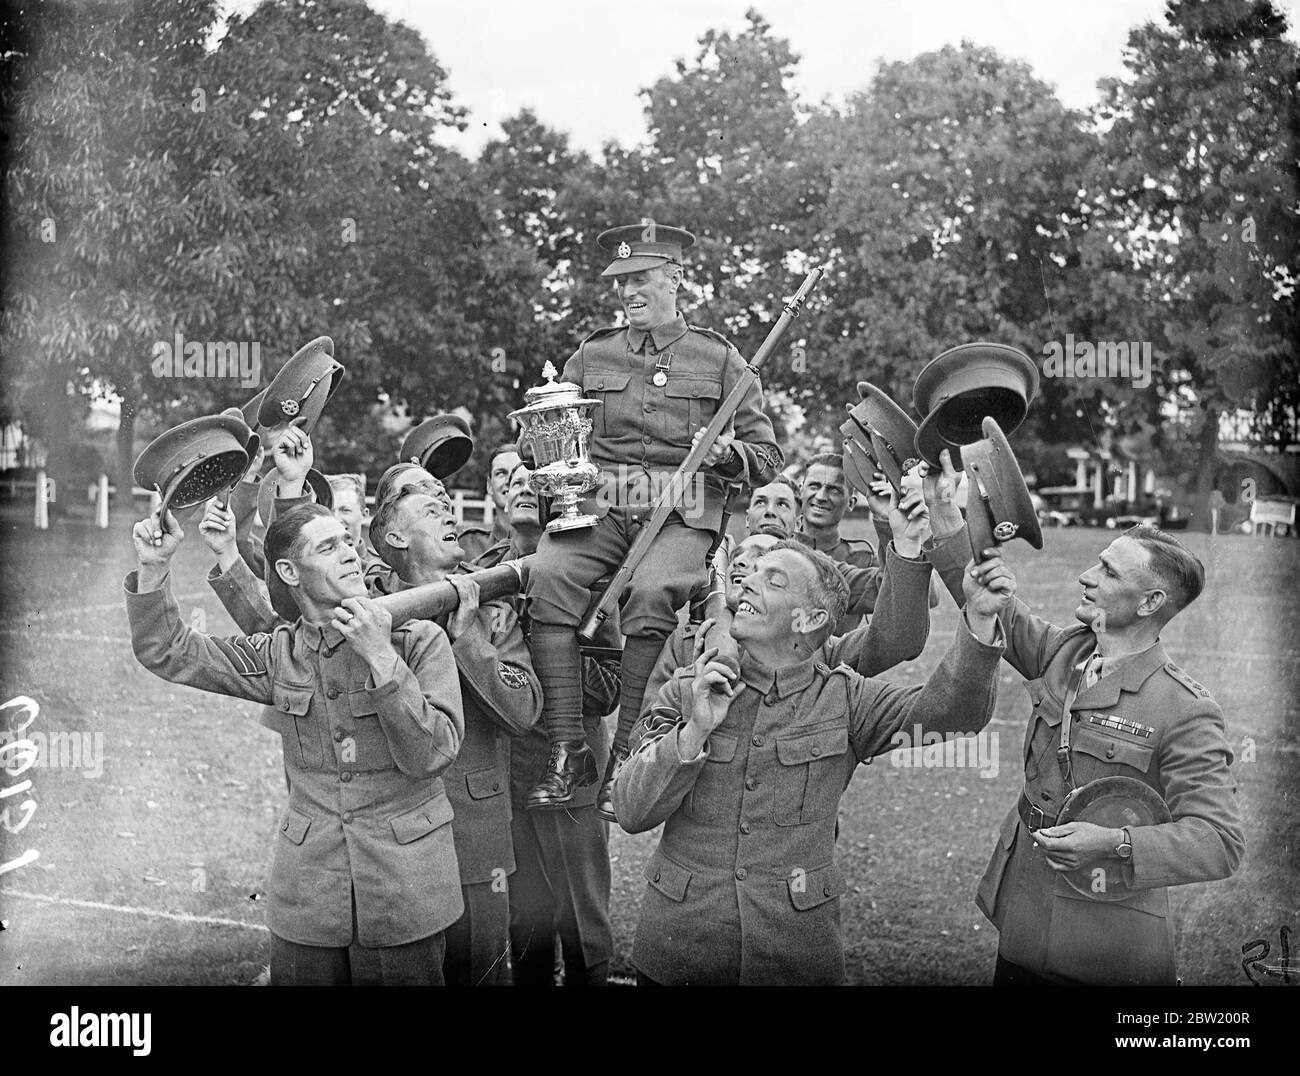 Corporal J. White of the Rifle Brigade won the Army rifle championship at Bisley. He carried off the King's Medal, the Watkin Cup, and the Army Rifle Association's gold jewel. His aggregate of 418 was seven points better than that of the last year's winner. Corporal White chaired and cheered after his victory. 1 July 1937 Stock Photo